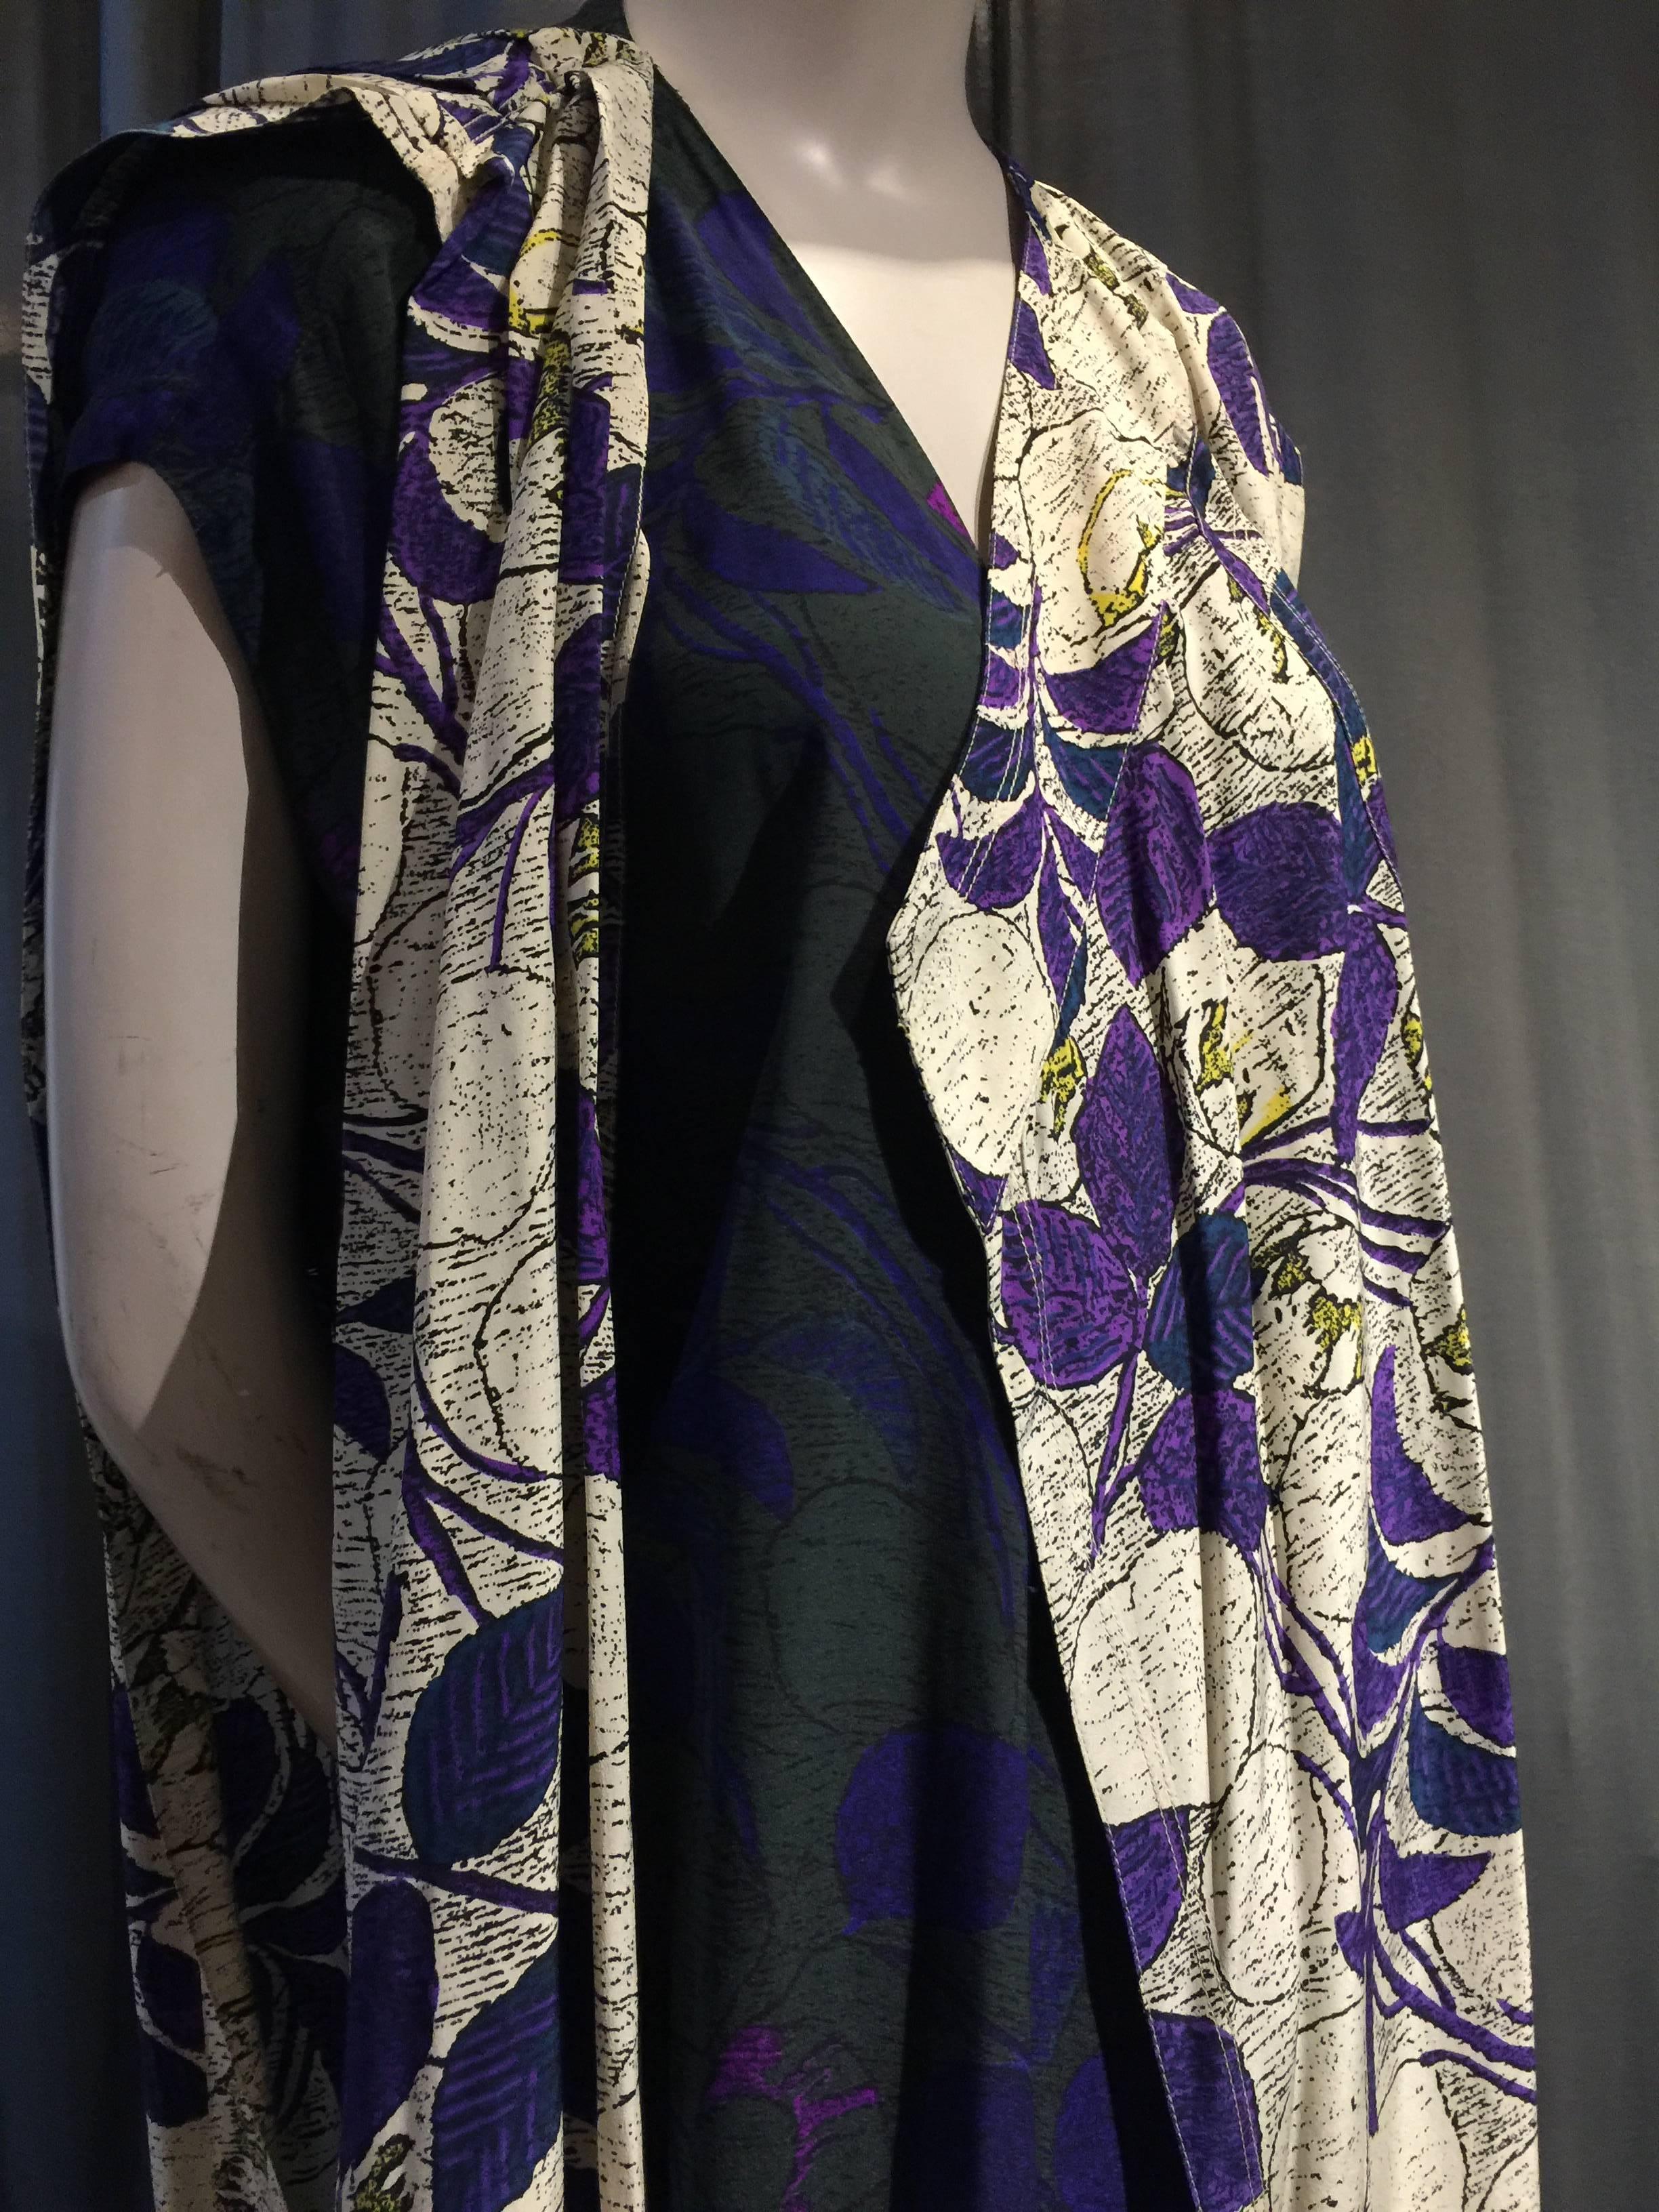 A unique 1980s Gianni Versace silk floral foulard duster with abstract print in purple, gray and white pattern mix. Layers of silk wrap around the body in a loose asymmetrical drape. 